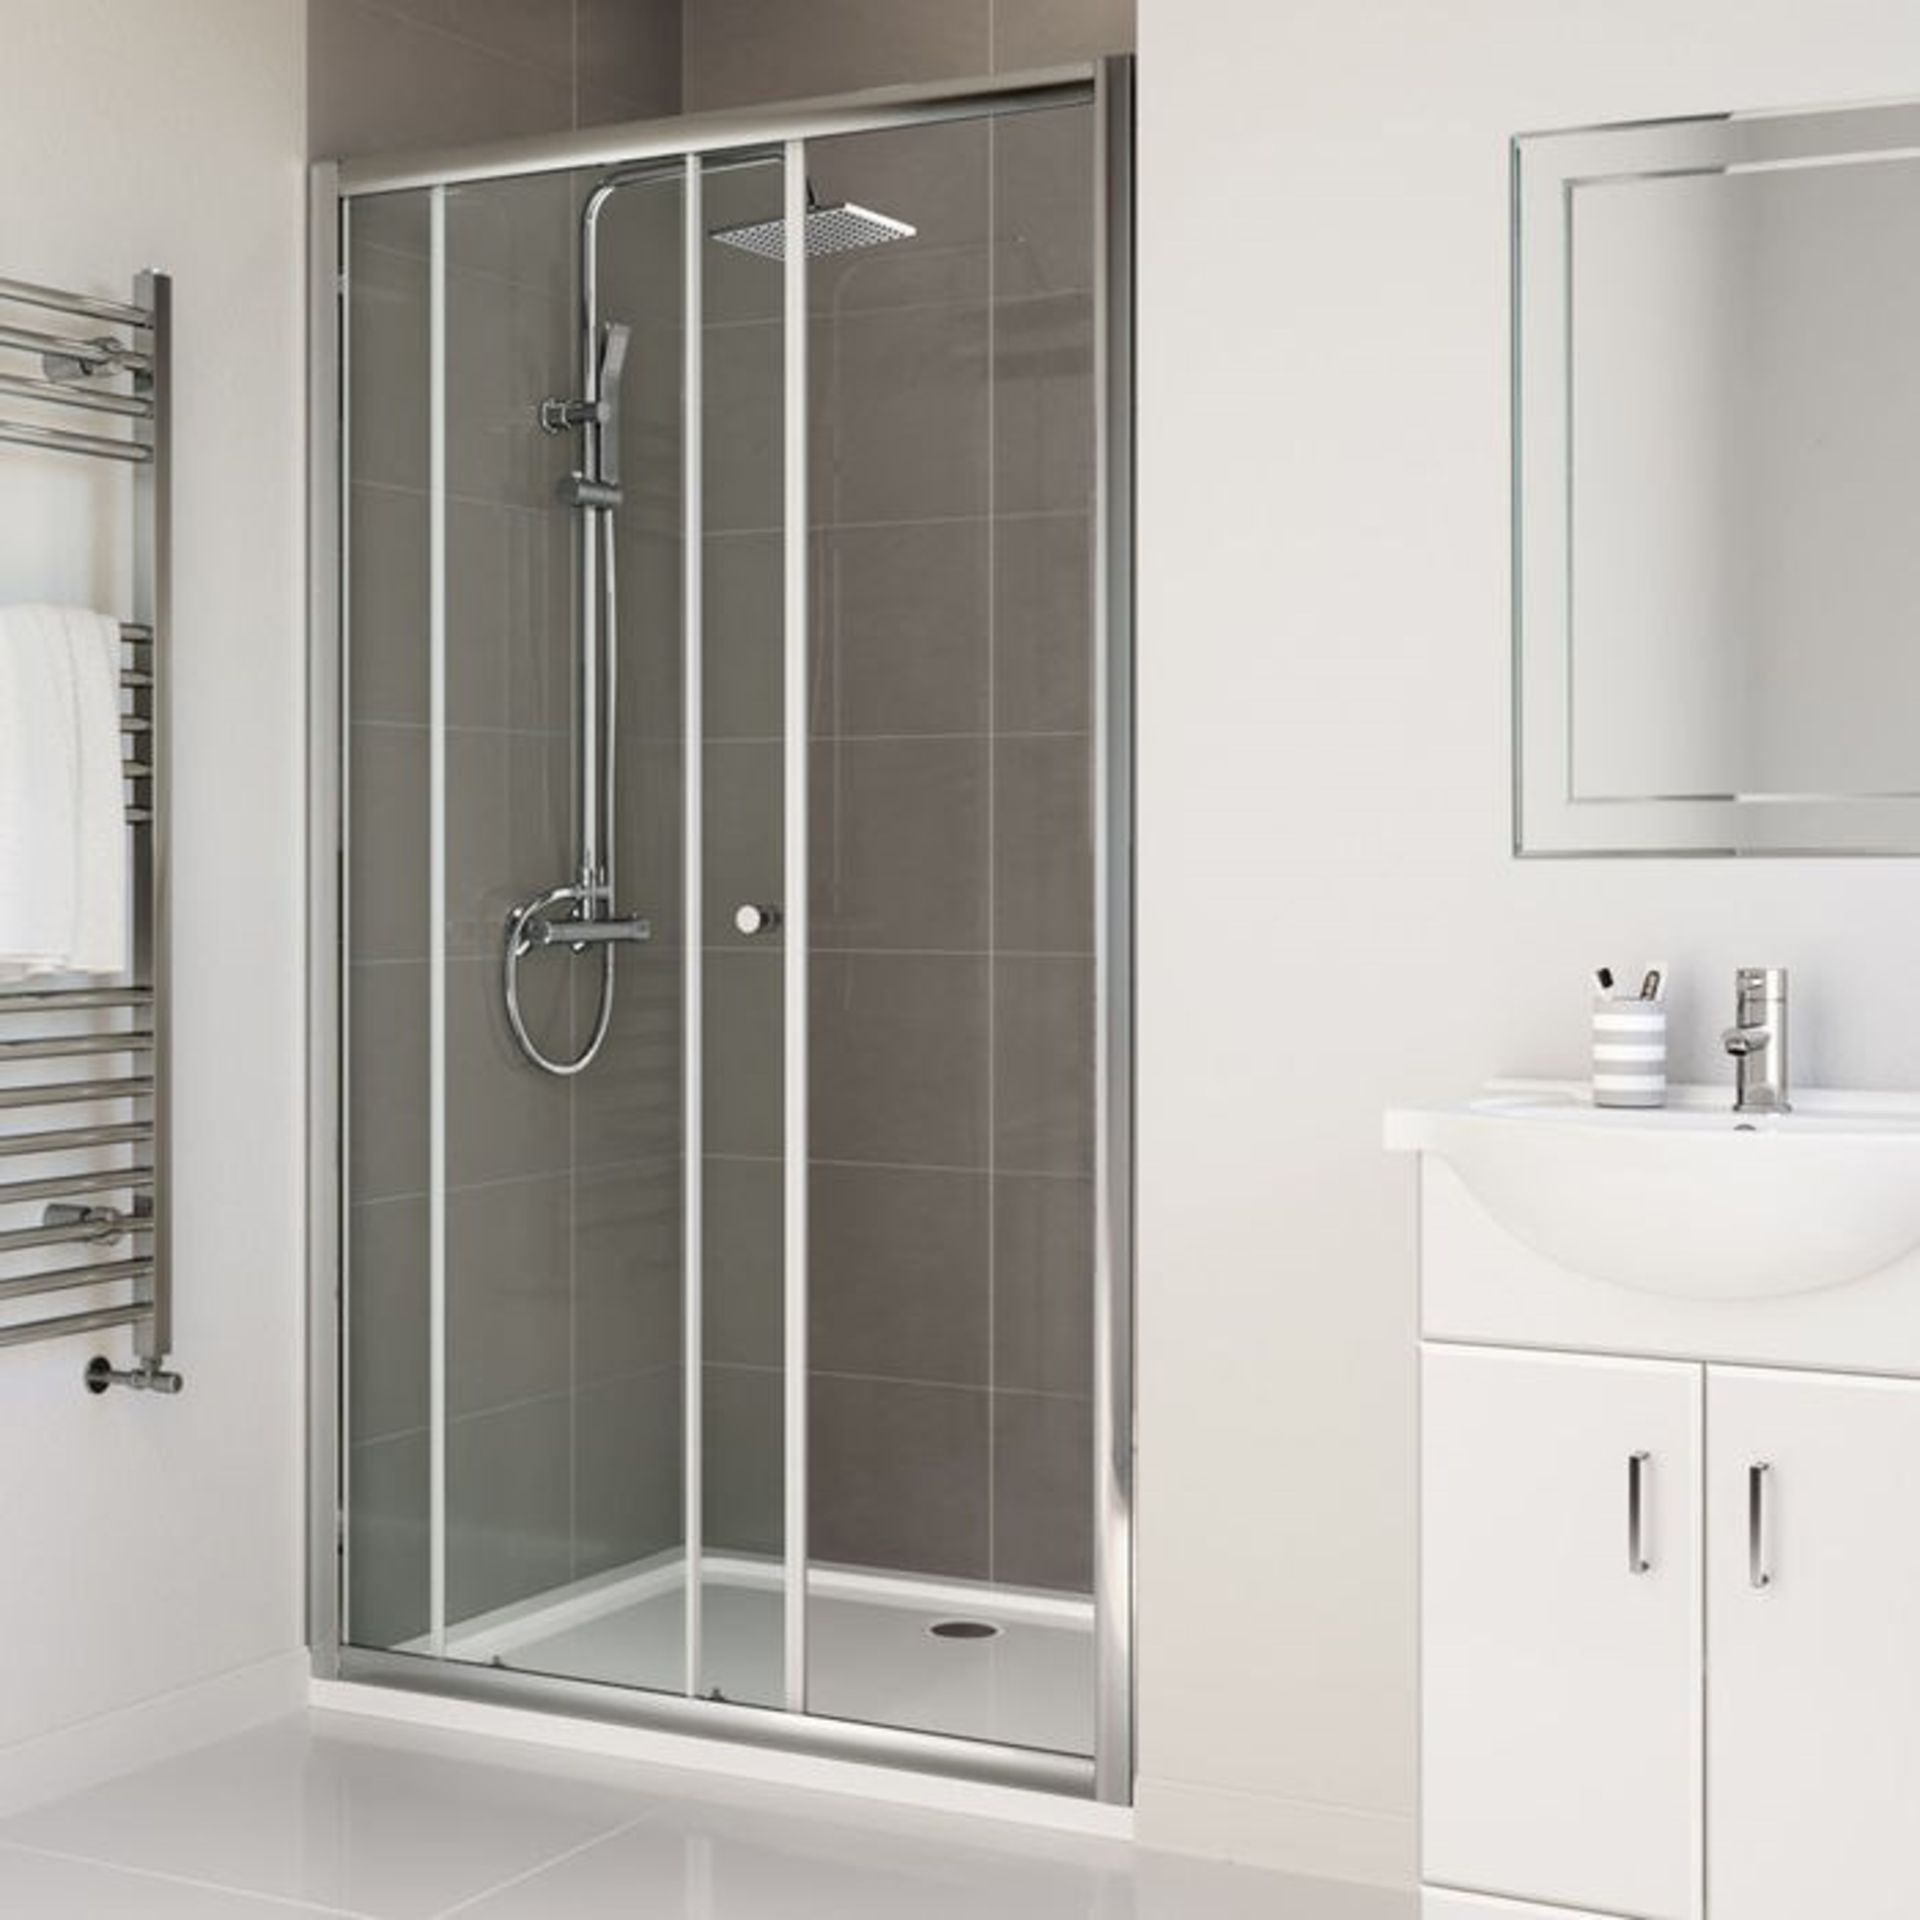 Twyfords 1000mm - Elements Sliding Shower Door. RRP £399.99.8mm Safety Glass Fully waterproof ... - Image 2 of 2